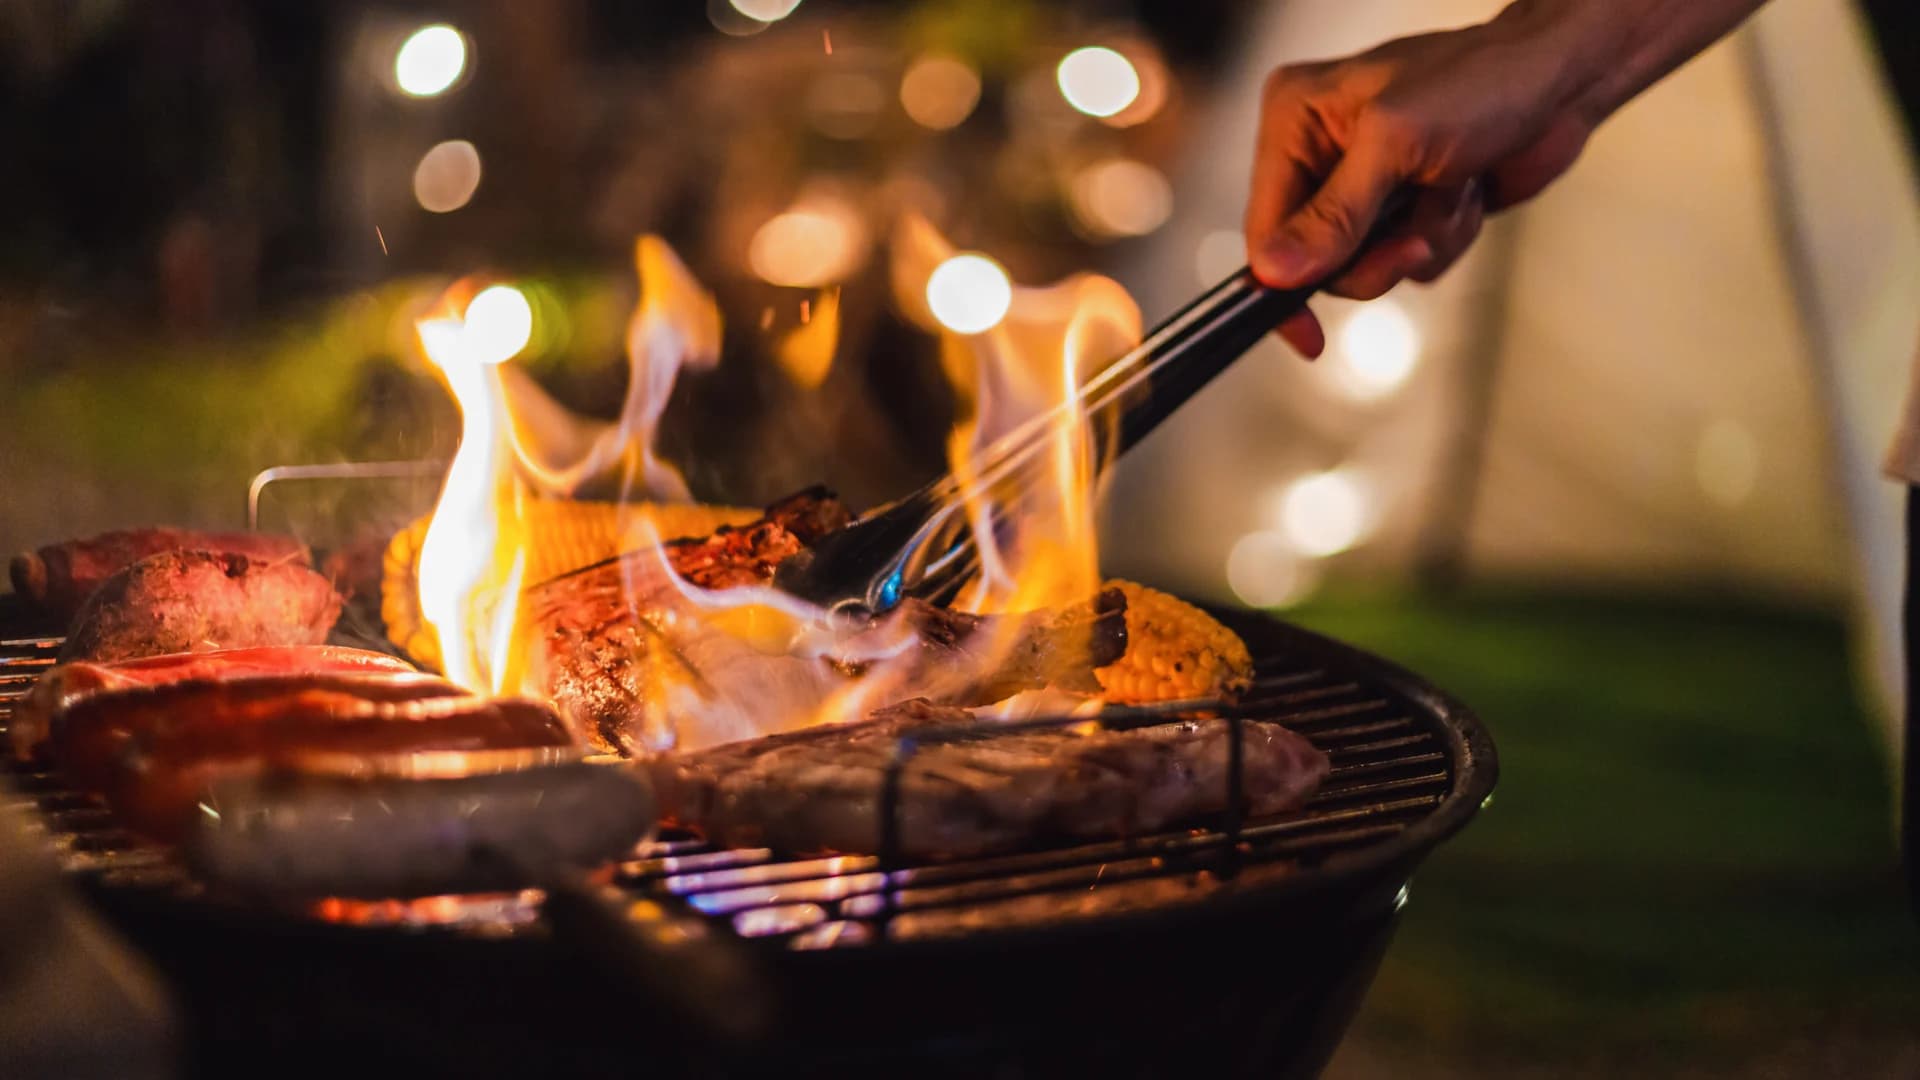 Green Grilling: Barbecue more sustainably with these tips